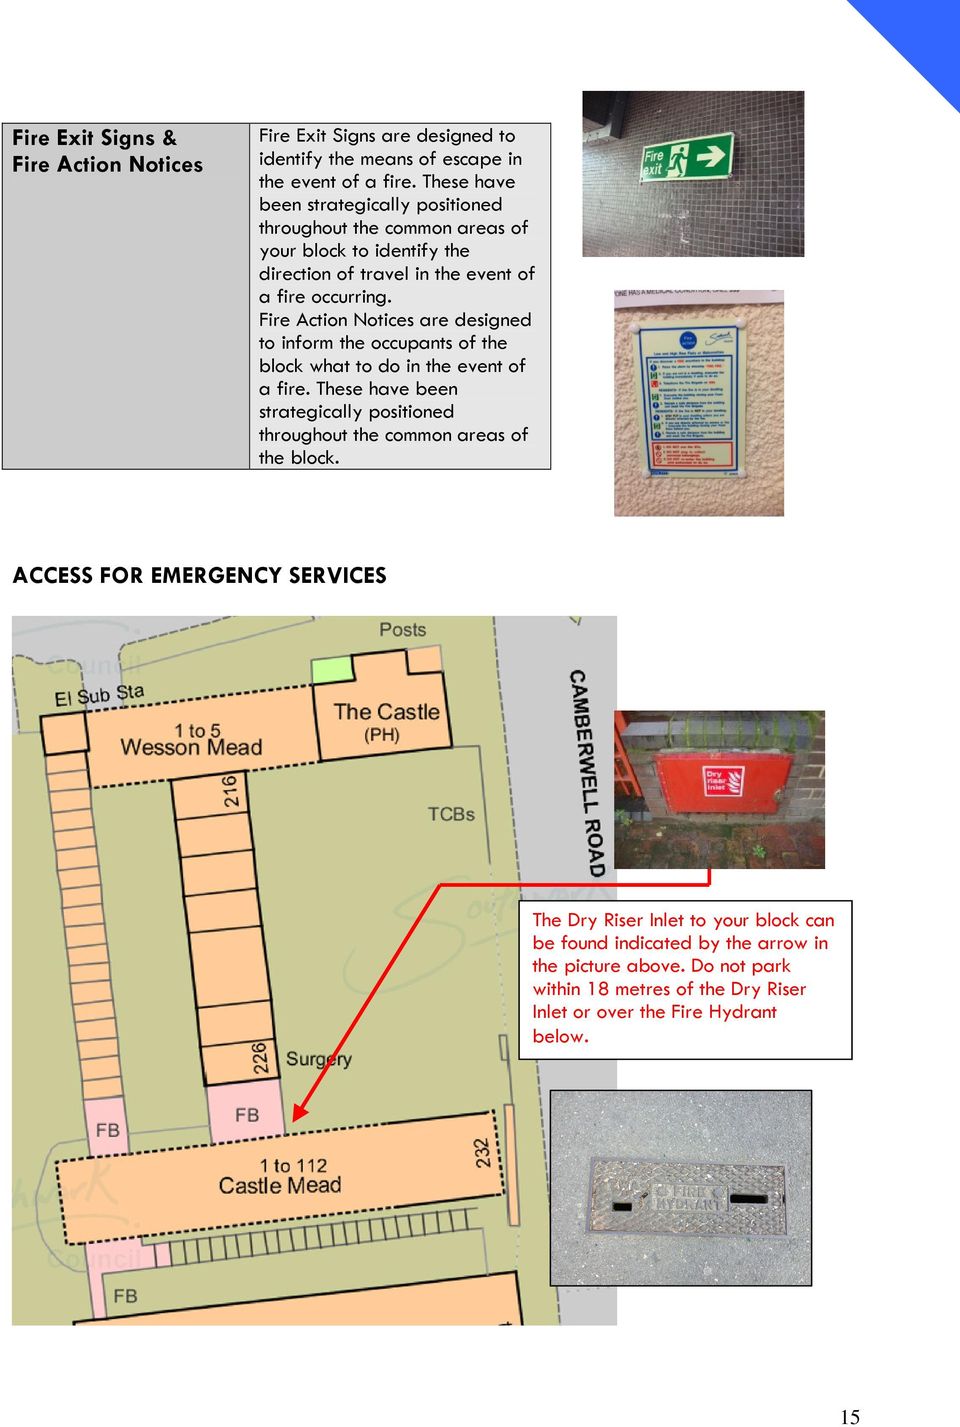 Fire Action Notices are designed to inform the occupants of the block what to do in the event of a fire.